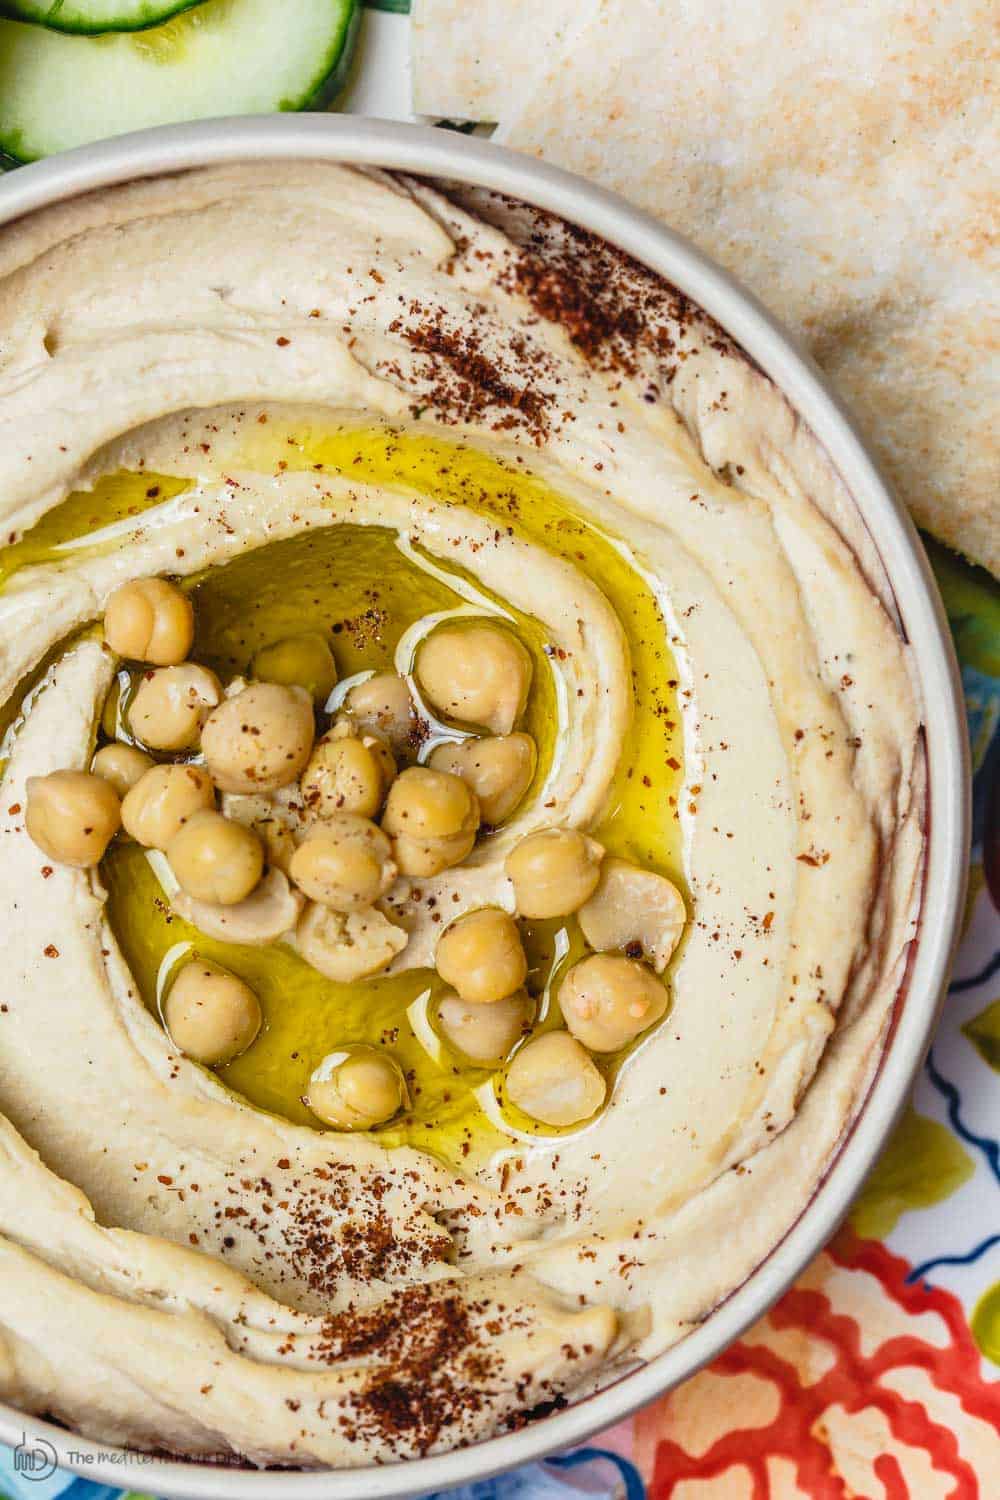 Easy Hummus Recipe Authentic Homemade From Scratch The Mediterranean Dish